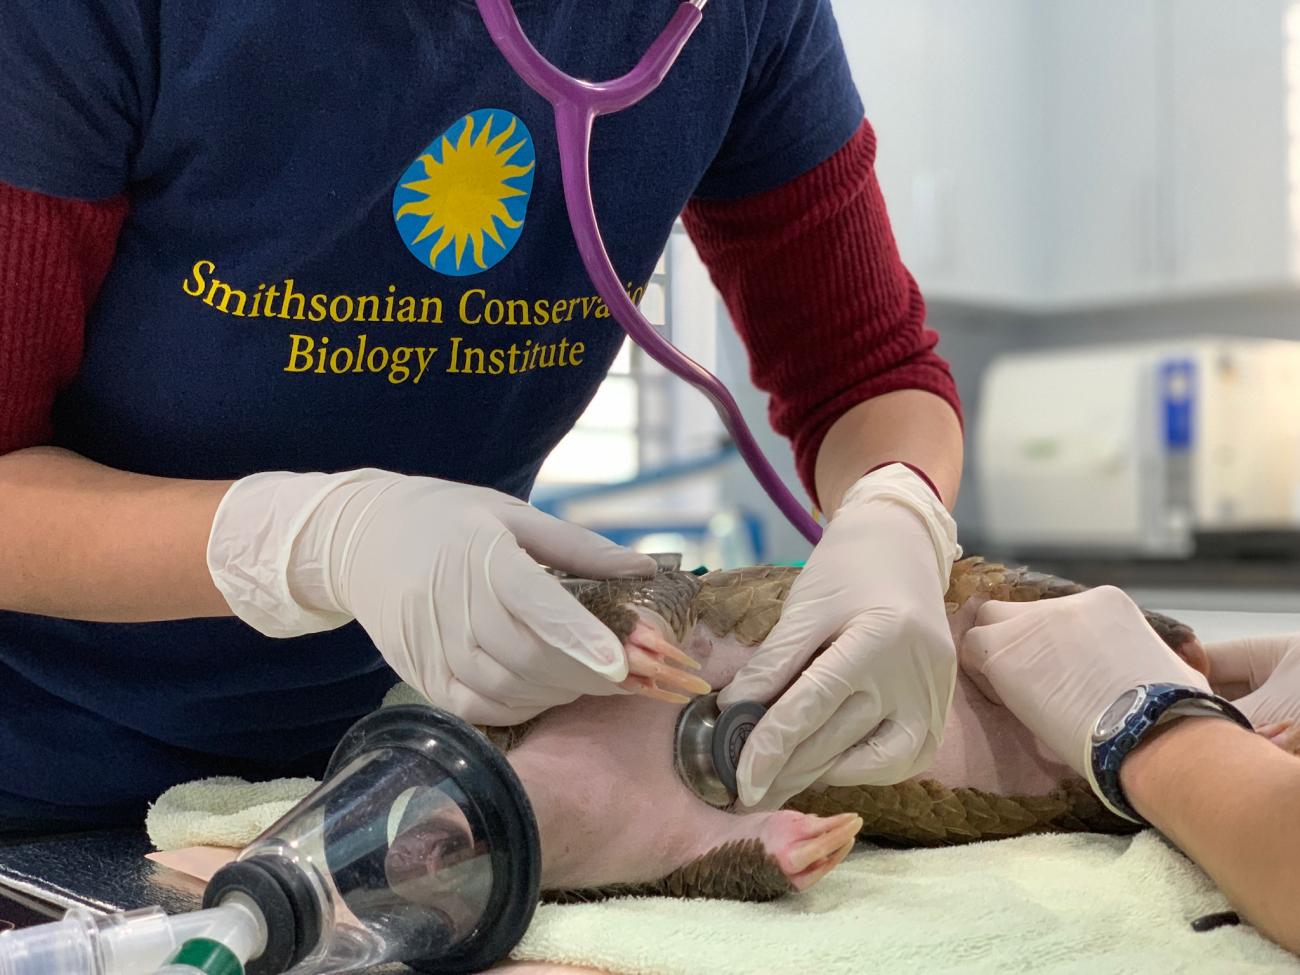 A wildlife veterinarian examines a sedated pangolin. She uses a stethoscope to listen to its vitals.